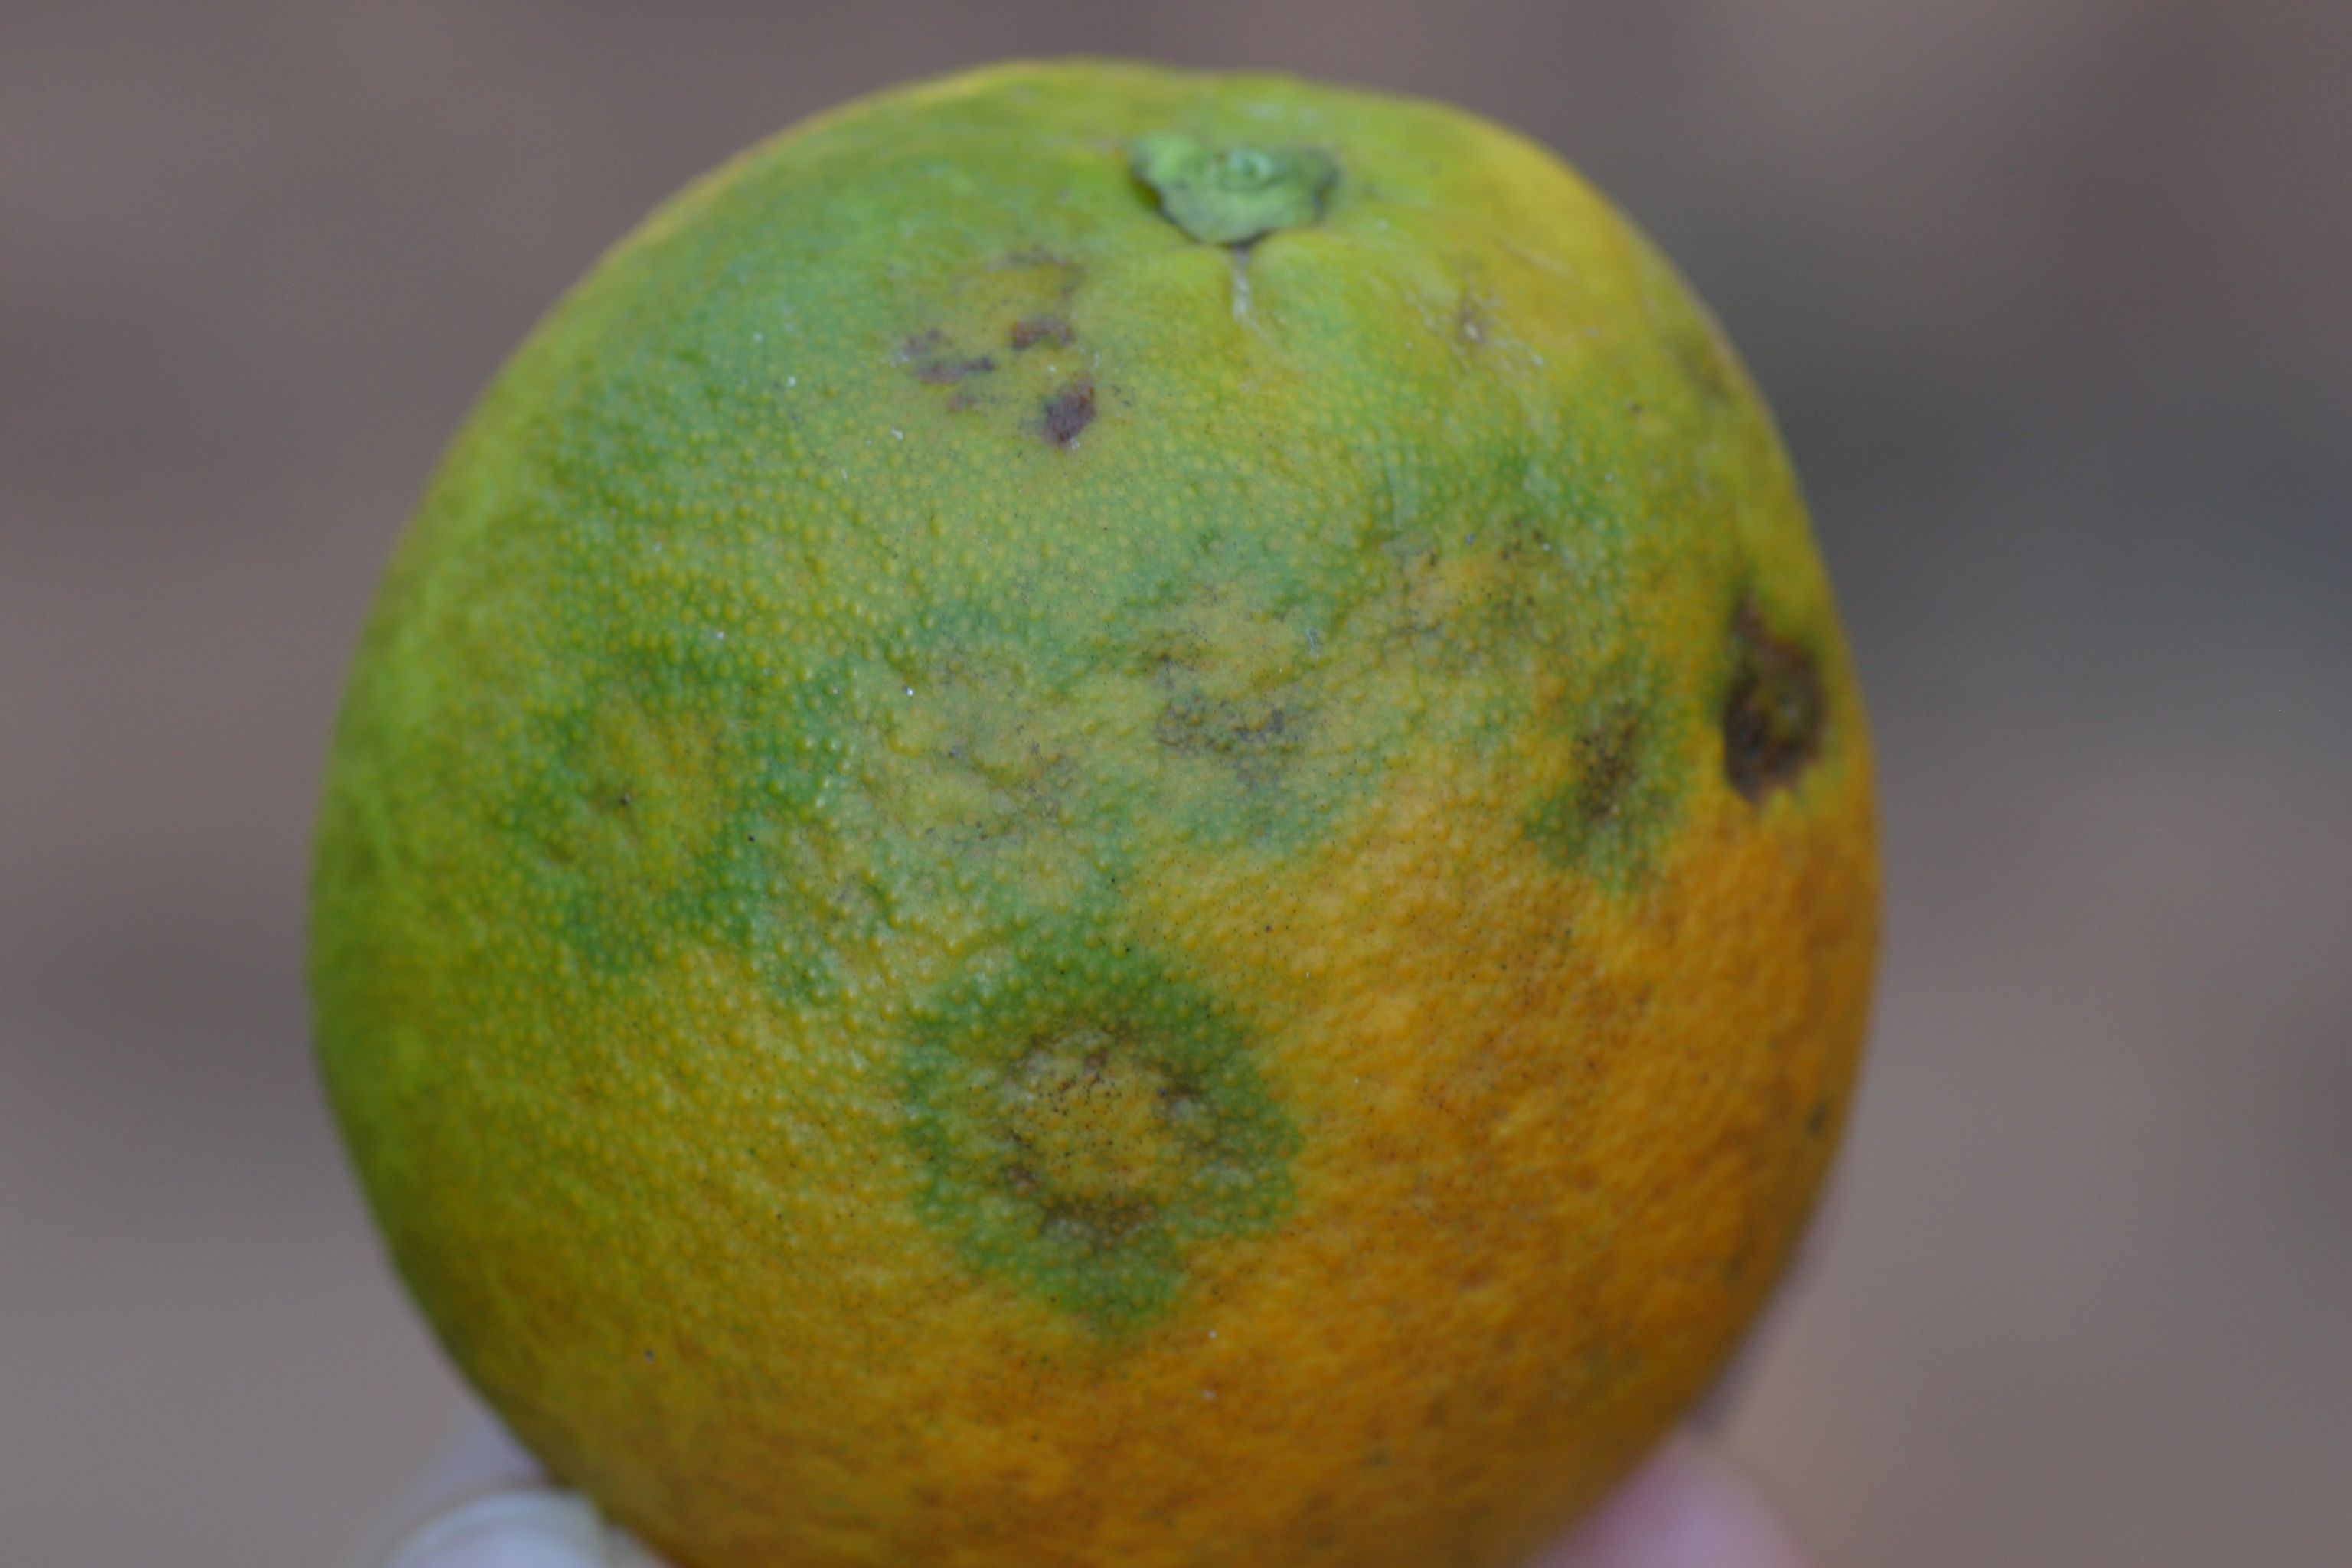 Fruit symptoms with zones and slight necrosis in the middle.